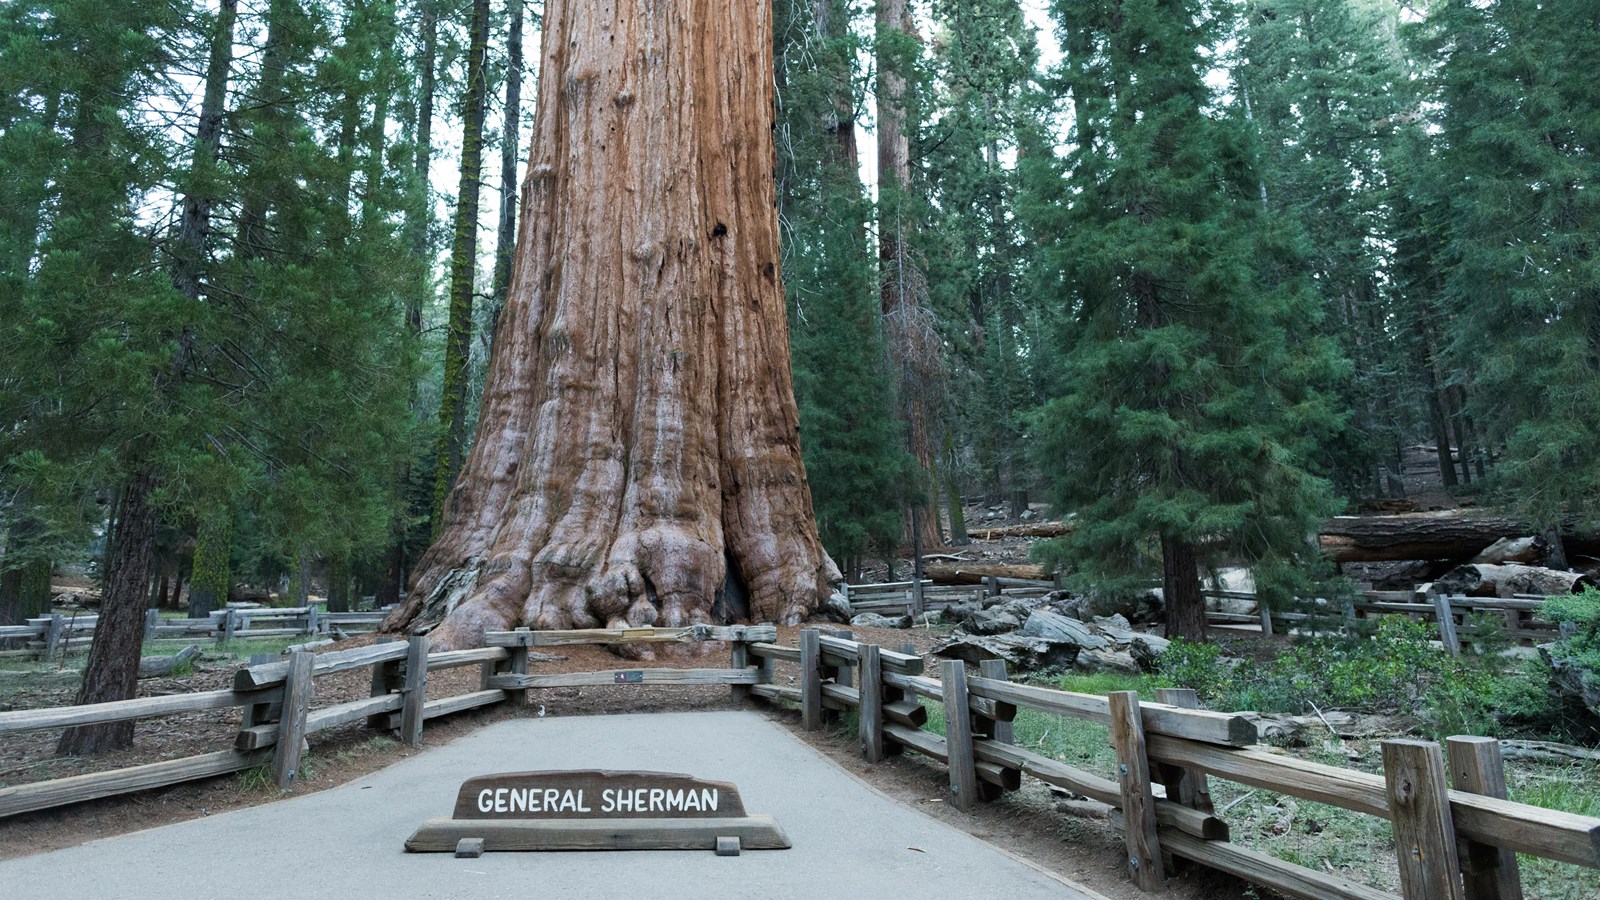 The wiring of General Sherman, a giant sequoia, with a plaque showing its name